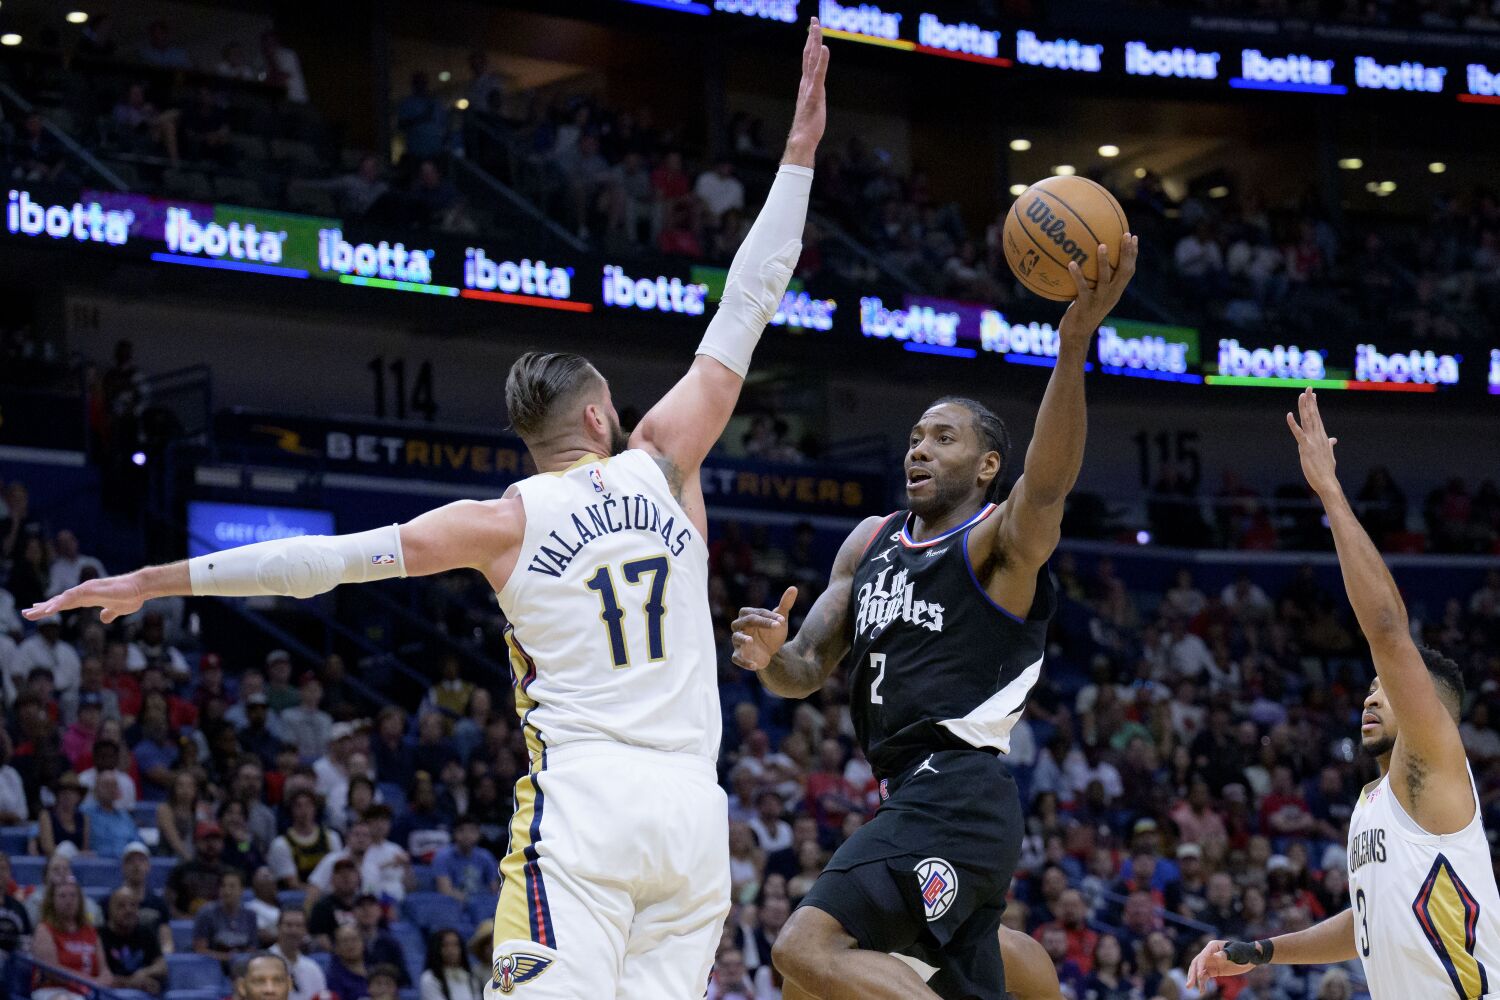 Pelicans beat Clippers despite Kawhi Leonard's 40 points in back-to-back effort